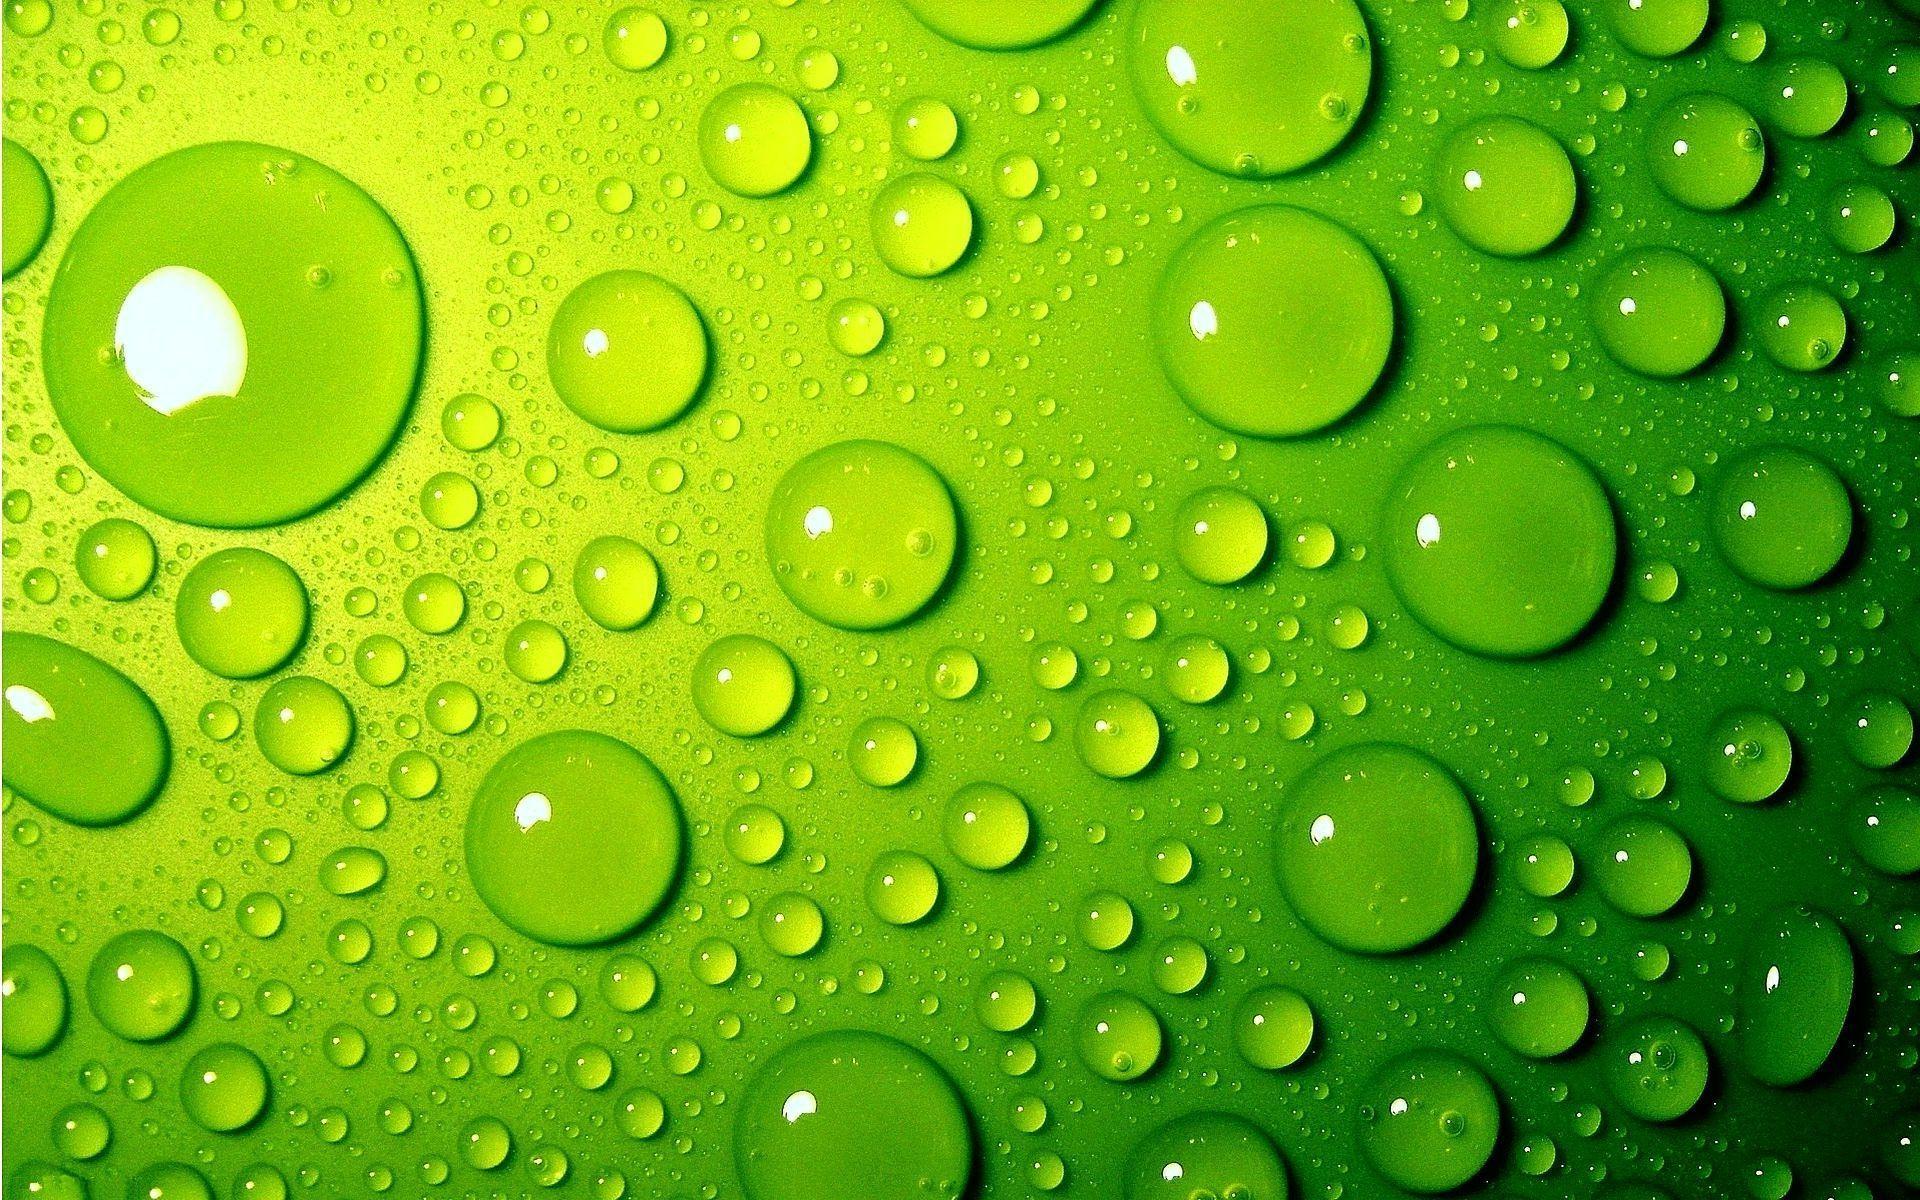 Water Drops on Green Surface Wallpaper and